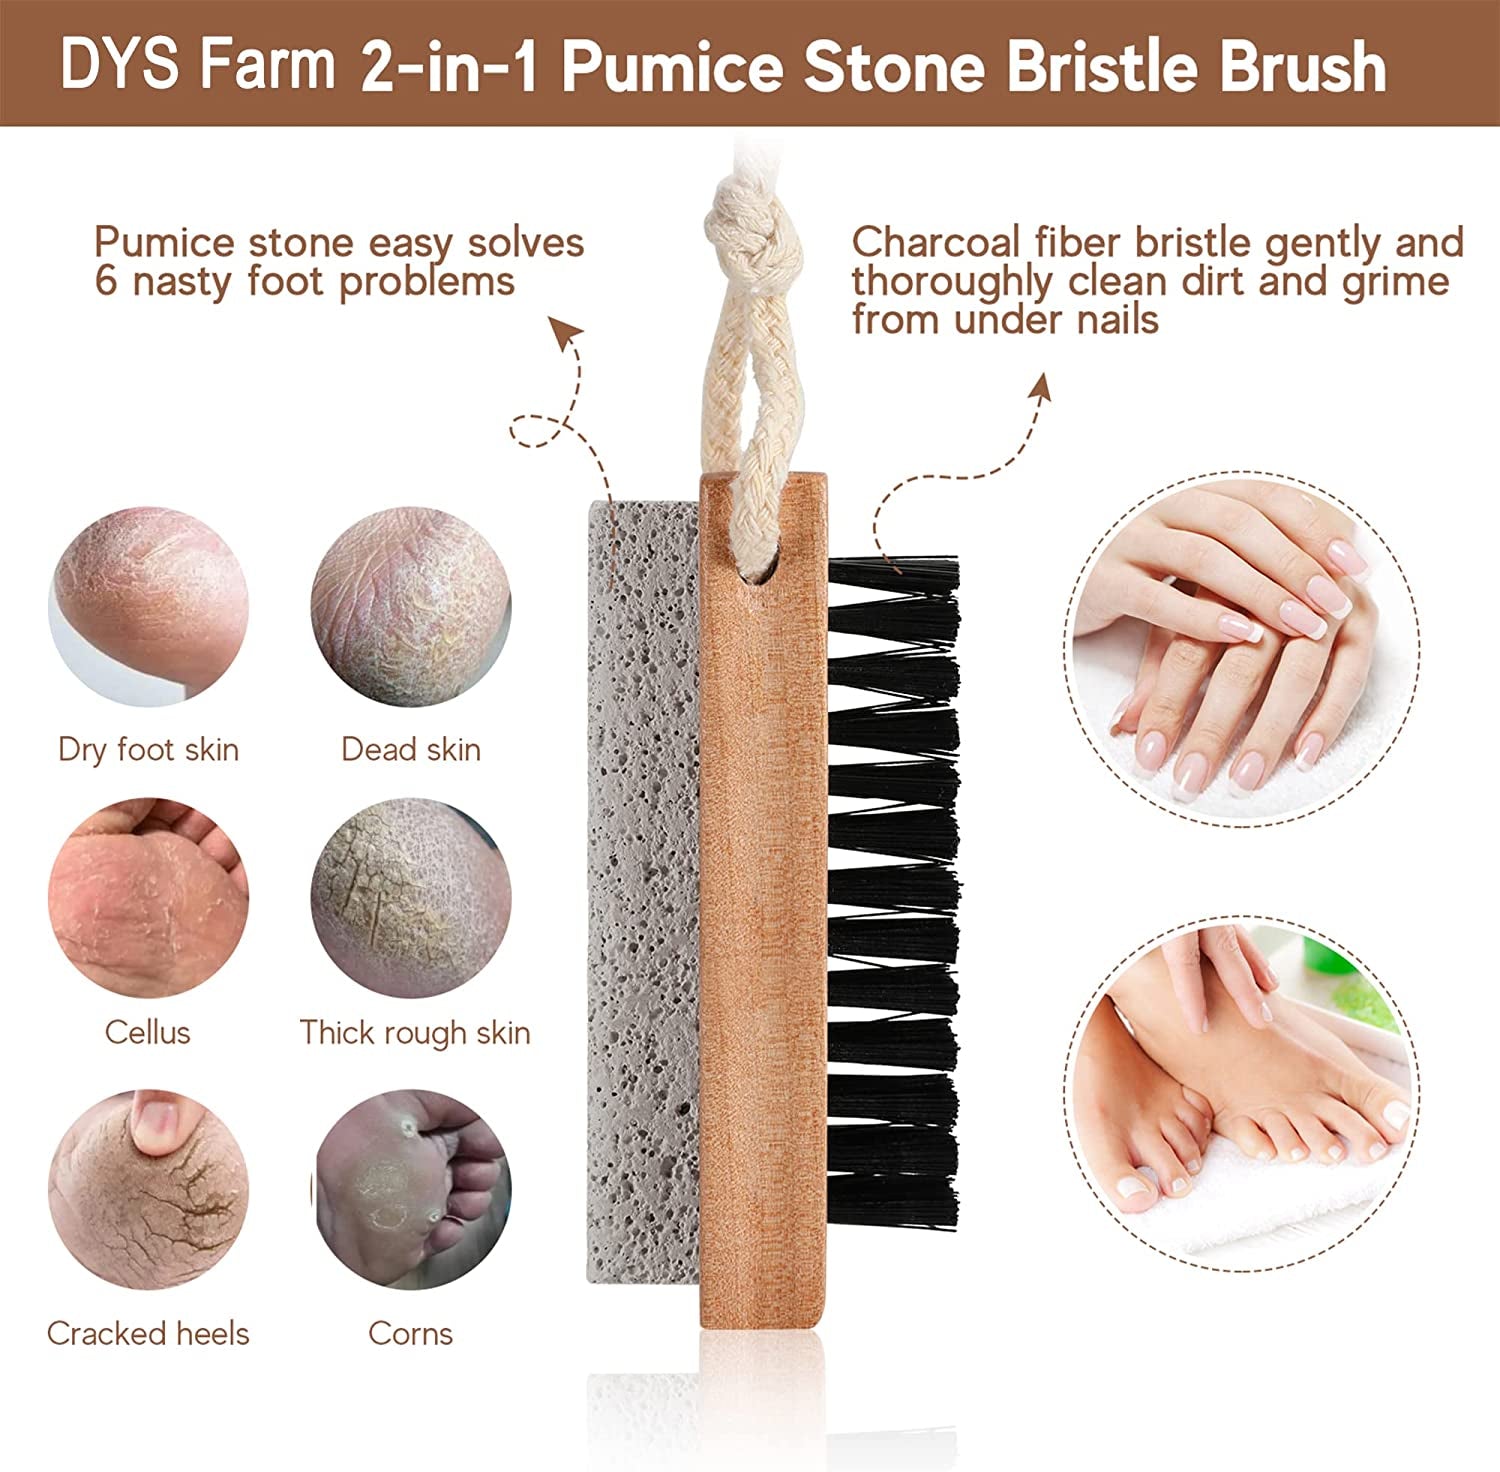 Nail Brushes for Cleaning Fingernails with Stiff Bristles - Wooden Fingernail Brush, Foot Scrubber Brush with Pumice Stone for Cleansing Exfoliating Feet and Hands, 2 In1 Manicure Pedicure Tools